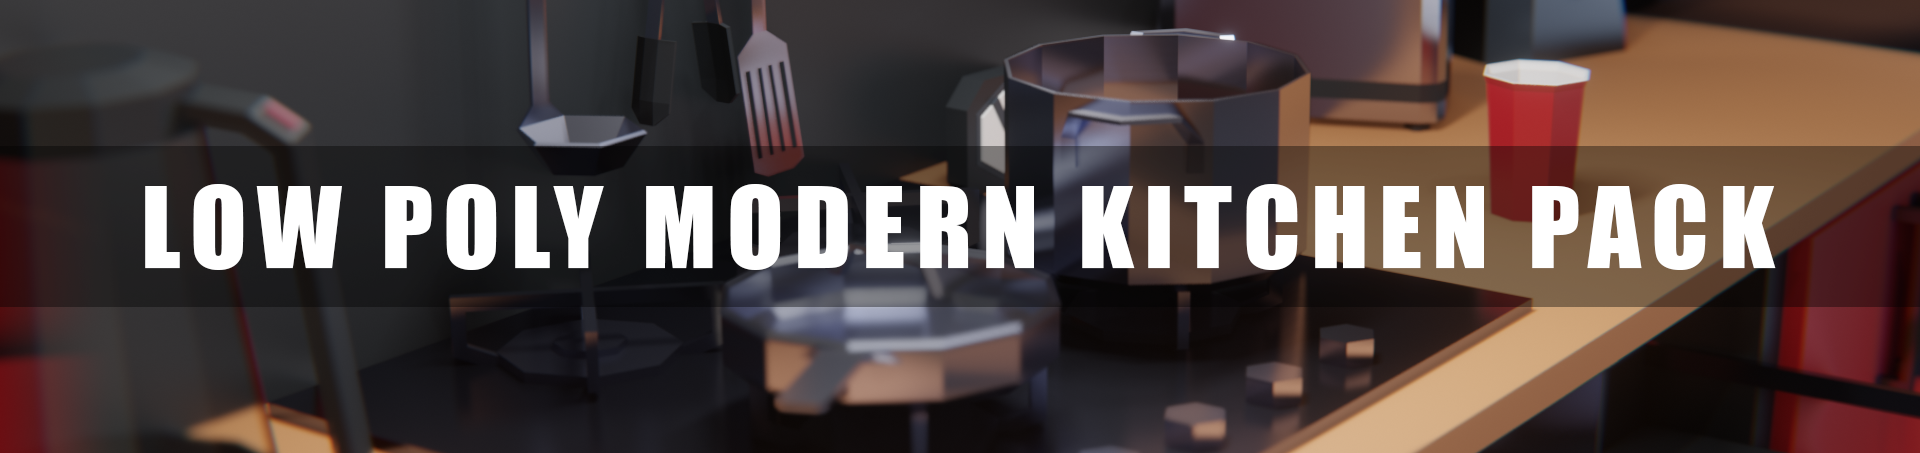 Low Poly Modern Kitchen Pack